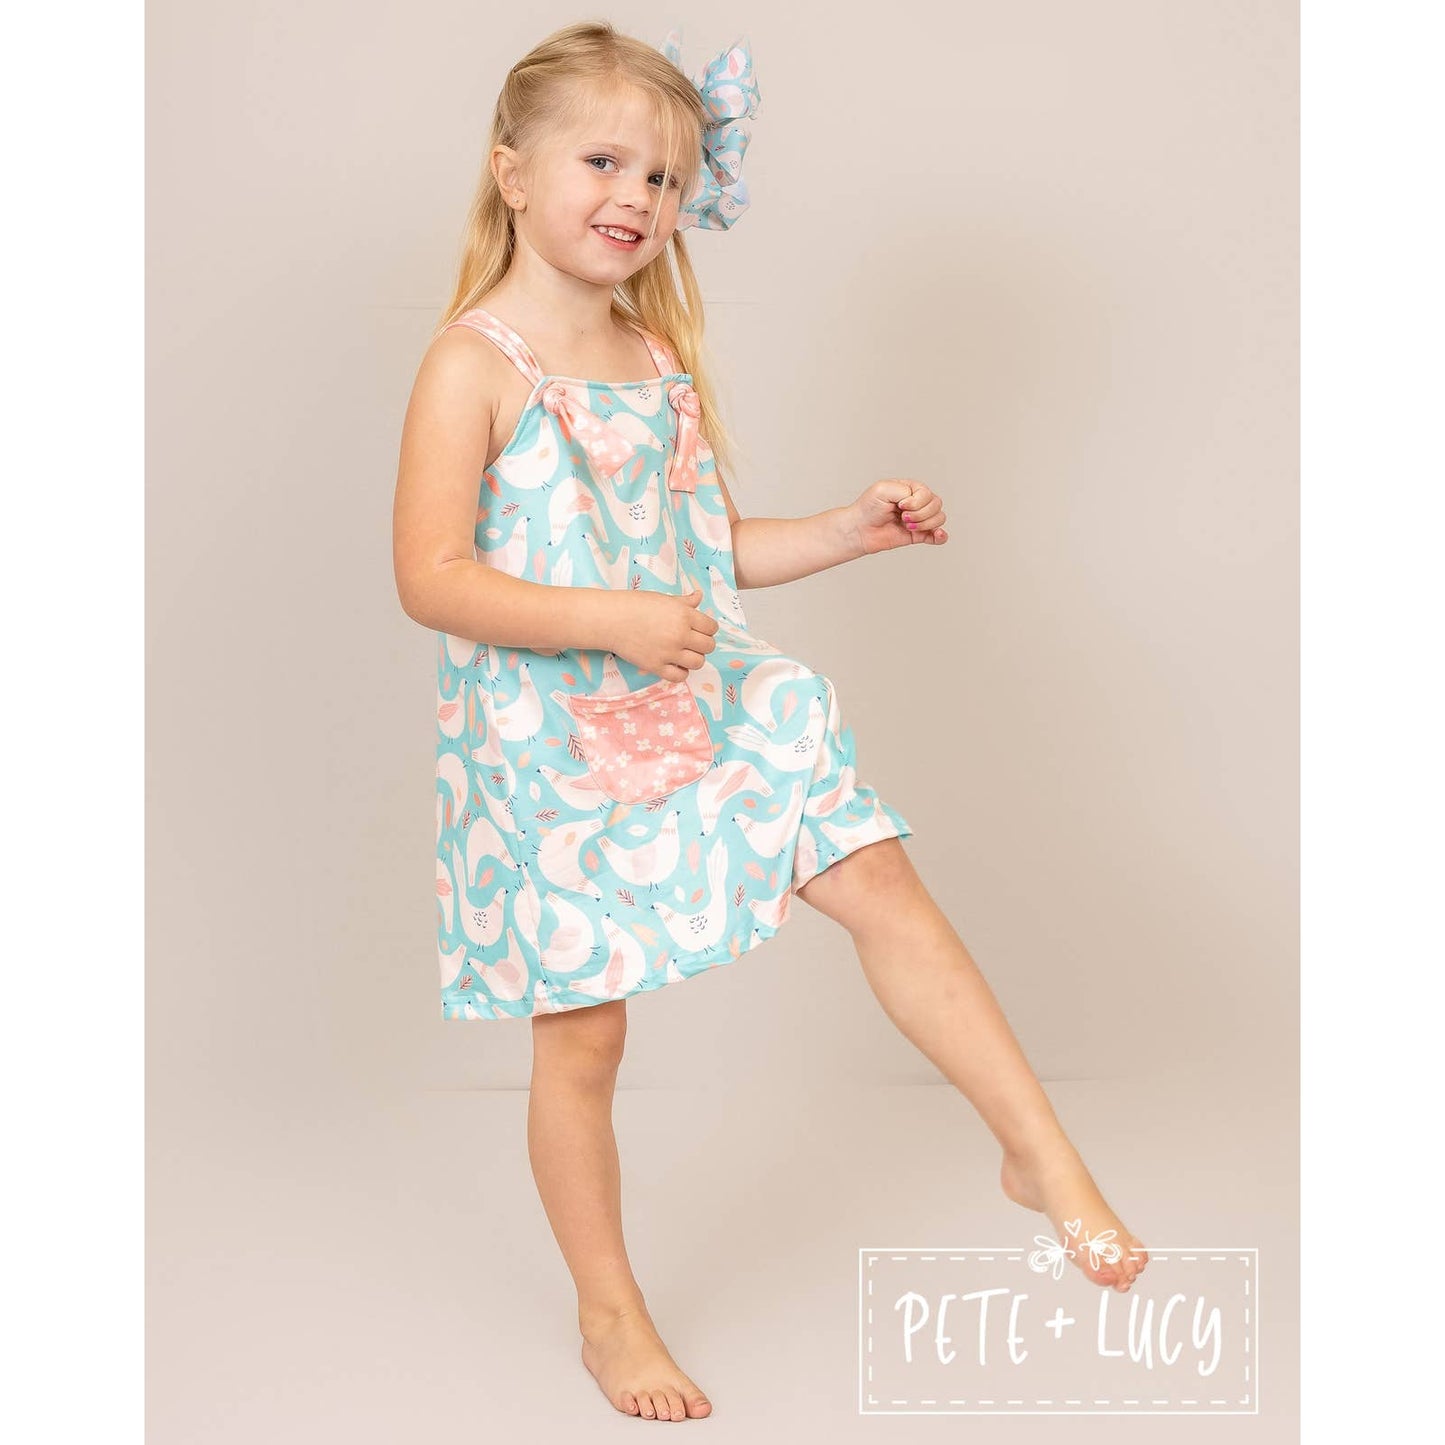 PETE + LUCY Charming Country Chicken Adjustable Dress